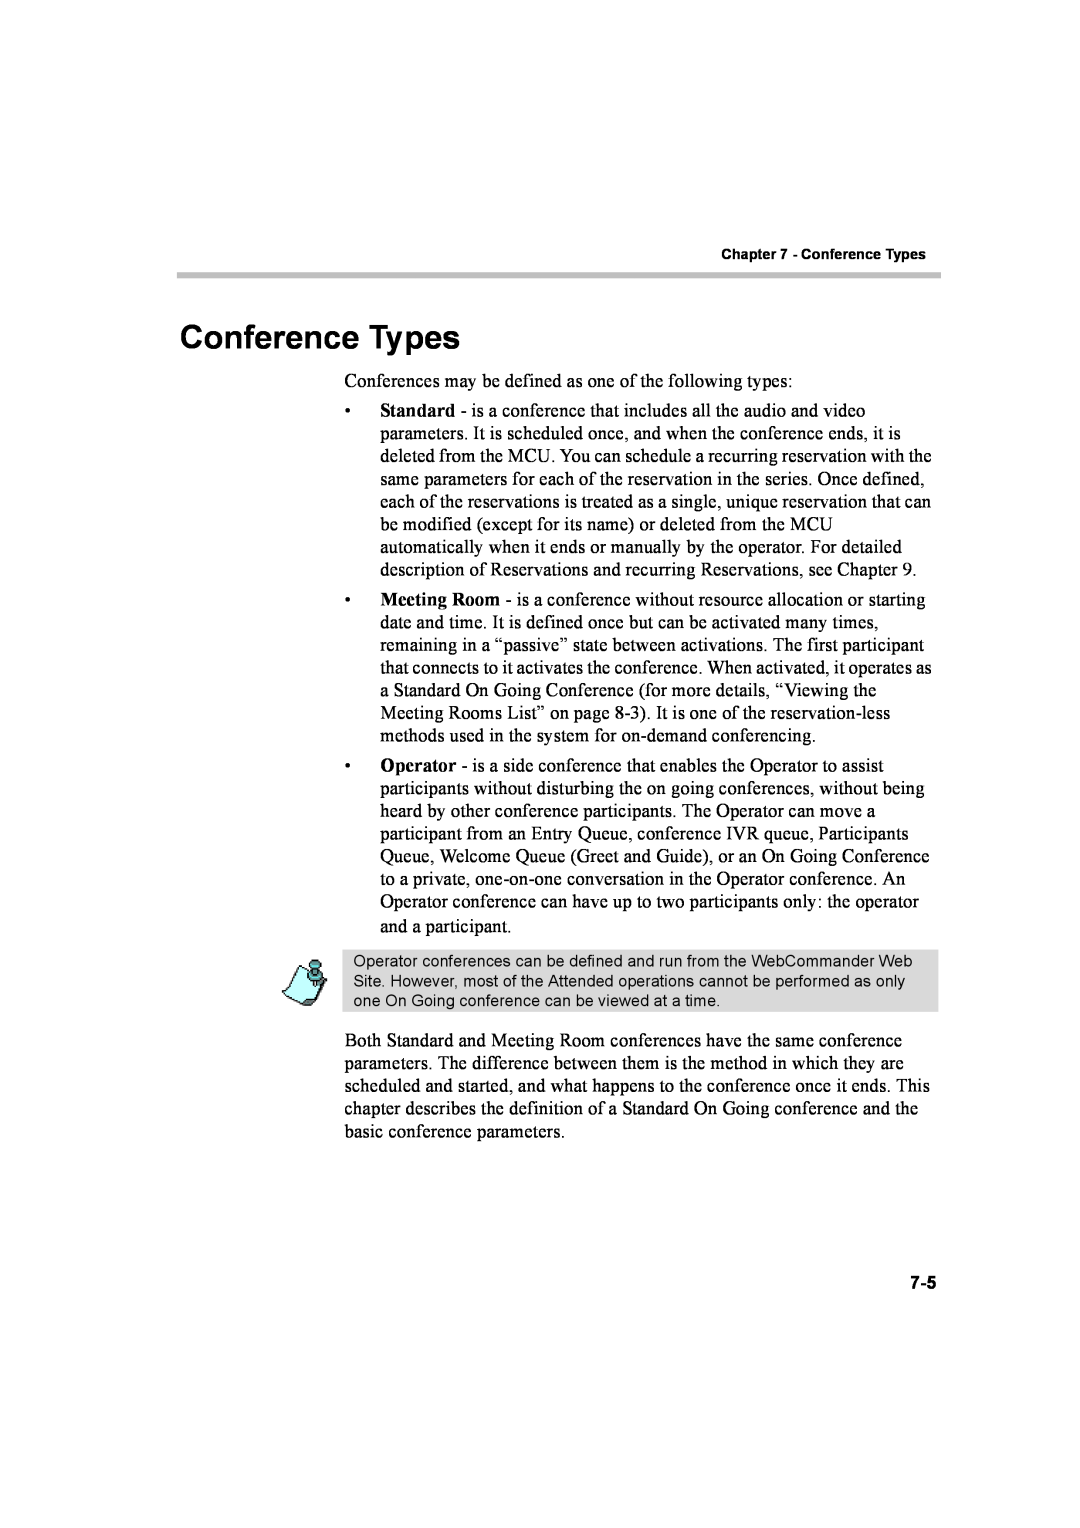 Polycom 8 manual Conference Types 